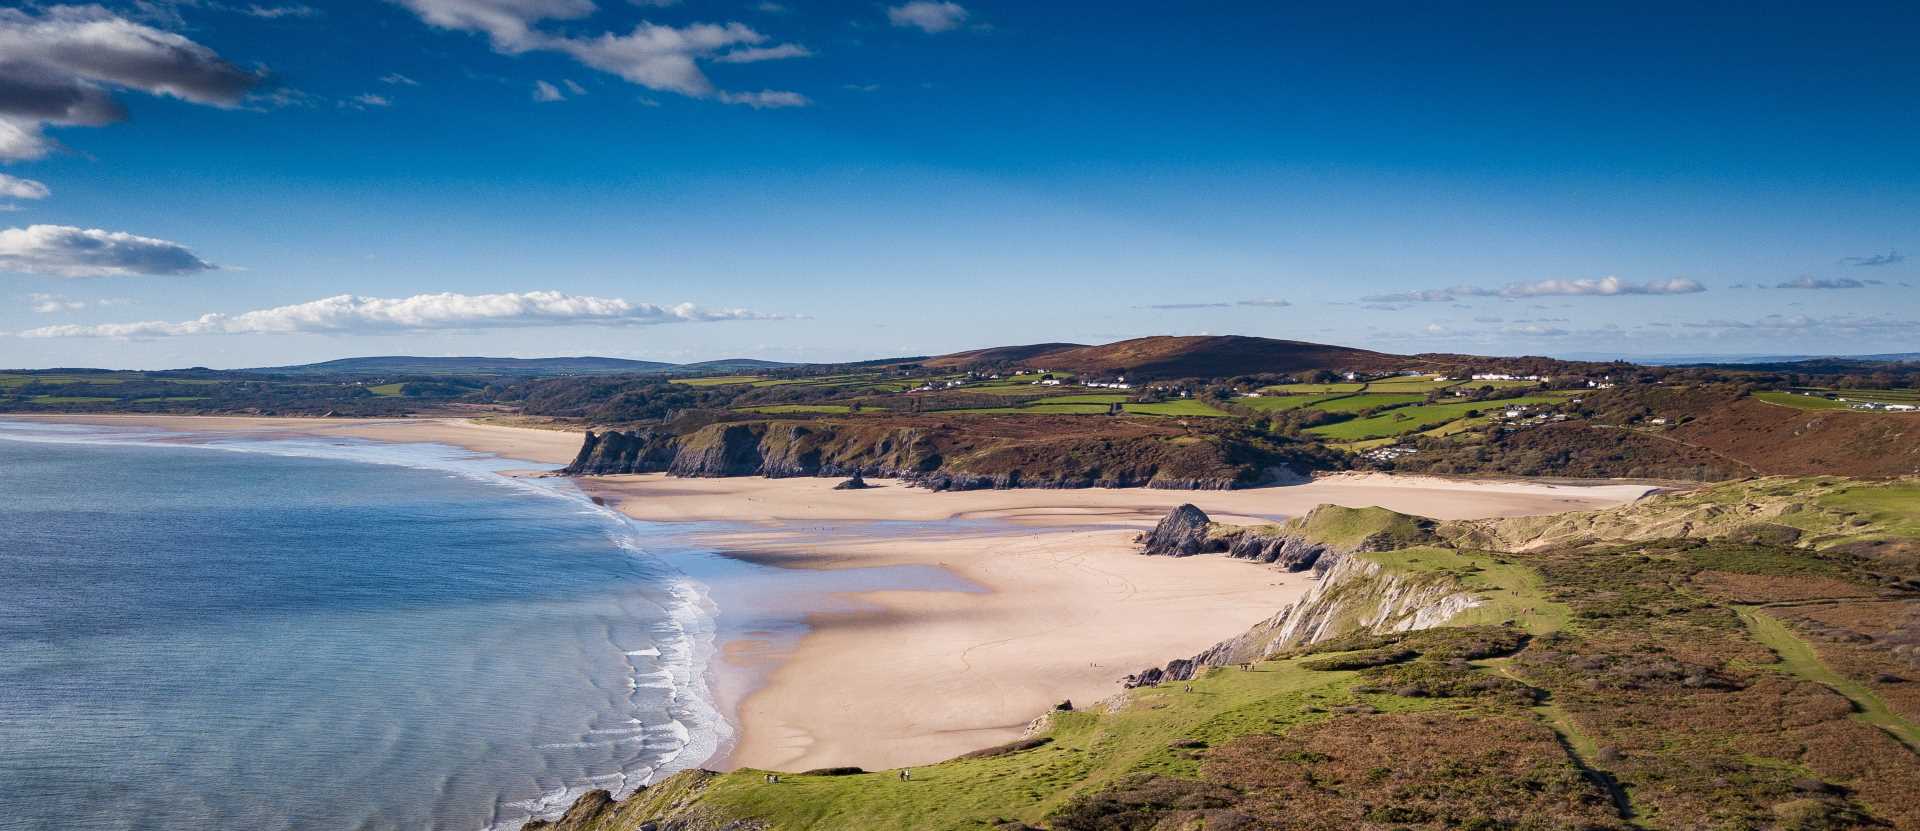 Three Cliffs Bay, penisola di Gower, Swansea, Galles - Campeggi in Galles